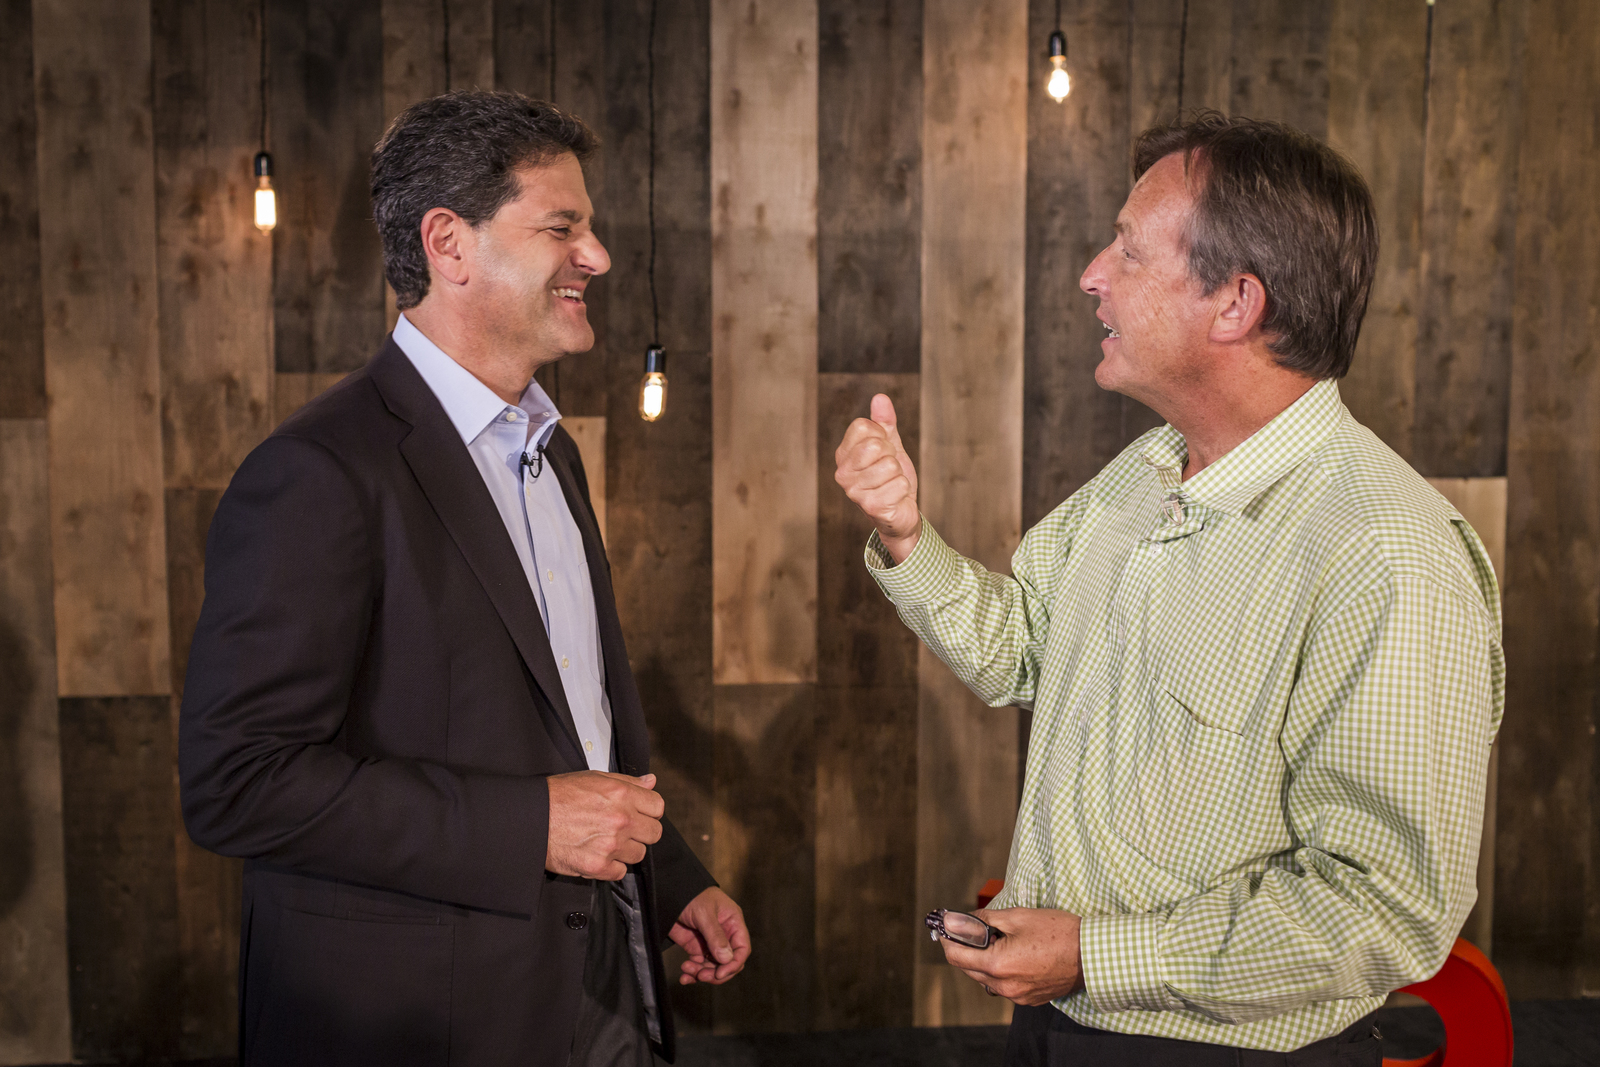 Nick Hanauer and TED Curator Chris Anderson are both "really bad at holding grudges." Here, the two talk before an in-office event. Photo: Ryan Lash